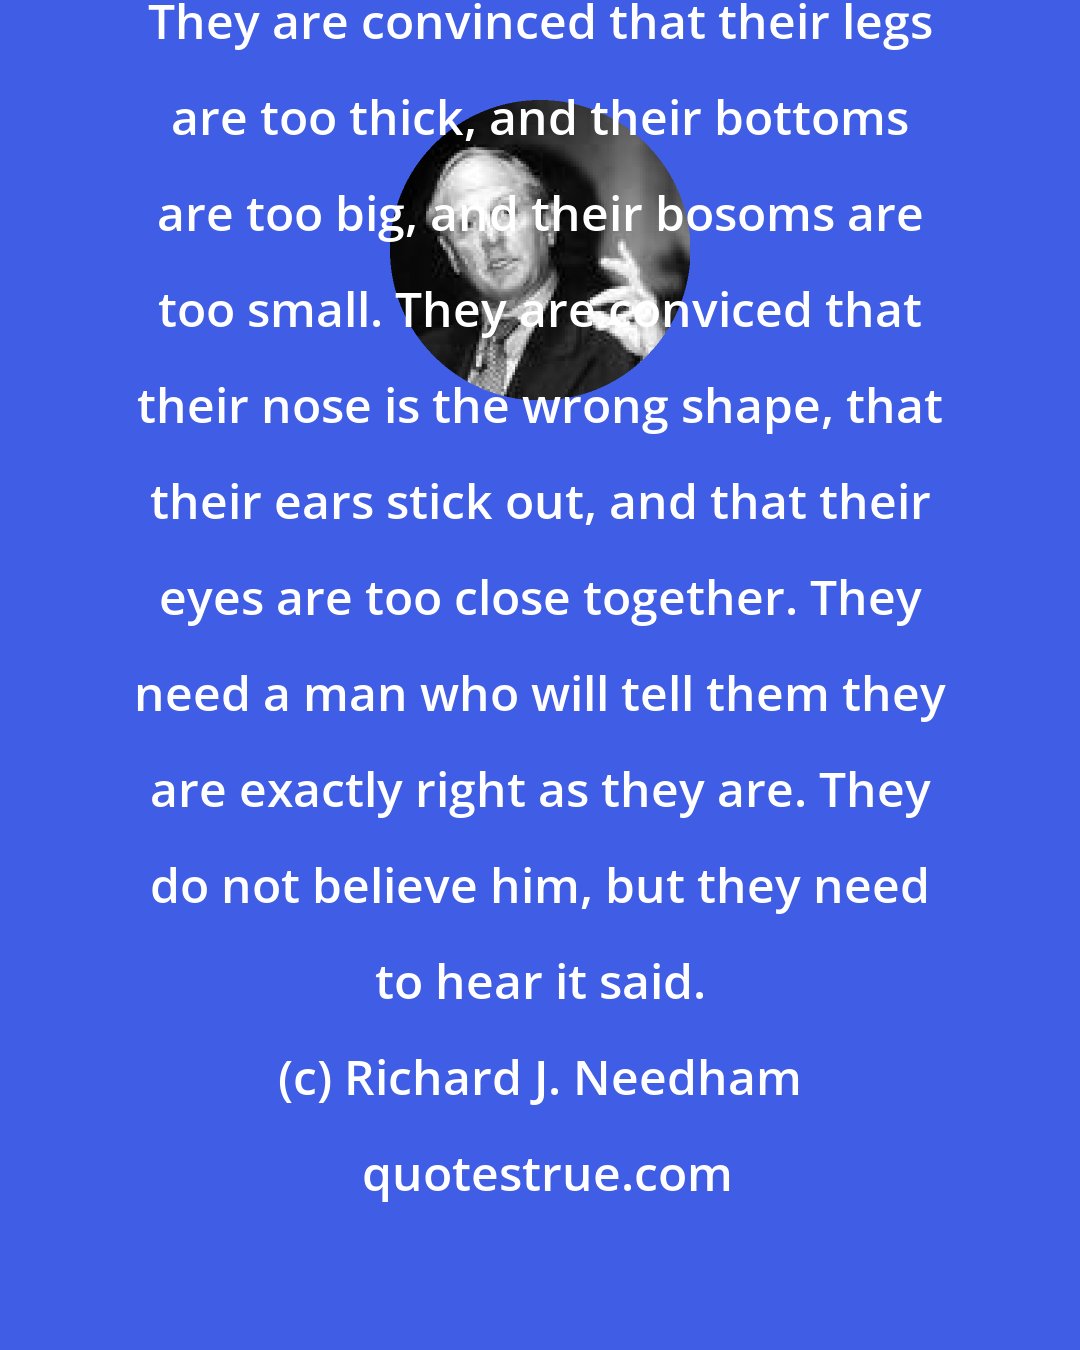 Richard J. Needham: Lovely girls are terribly insecure. They are convinced that their legs are too thick, and their bottoms are too big, and their bosoms are too small. They are conviced that their nose is the wrong shape, that their ears stick out, and that their eyes are too close together. They need a man who will tell them they are exactly right as they are. They do not believe him, but they need to hear it said.